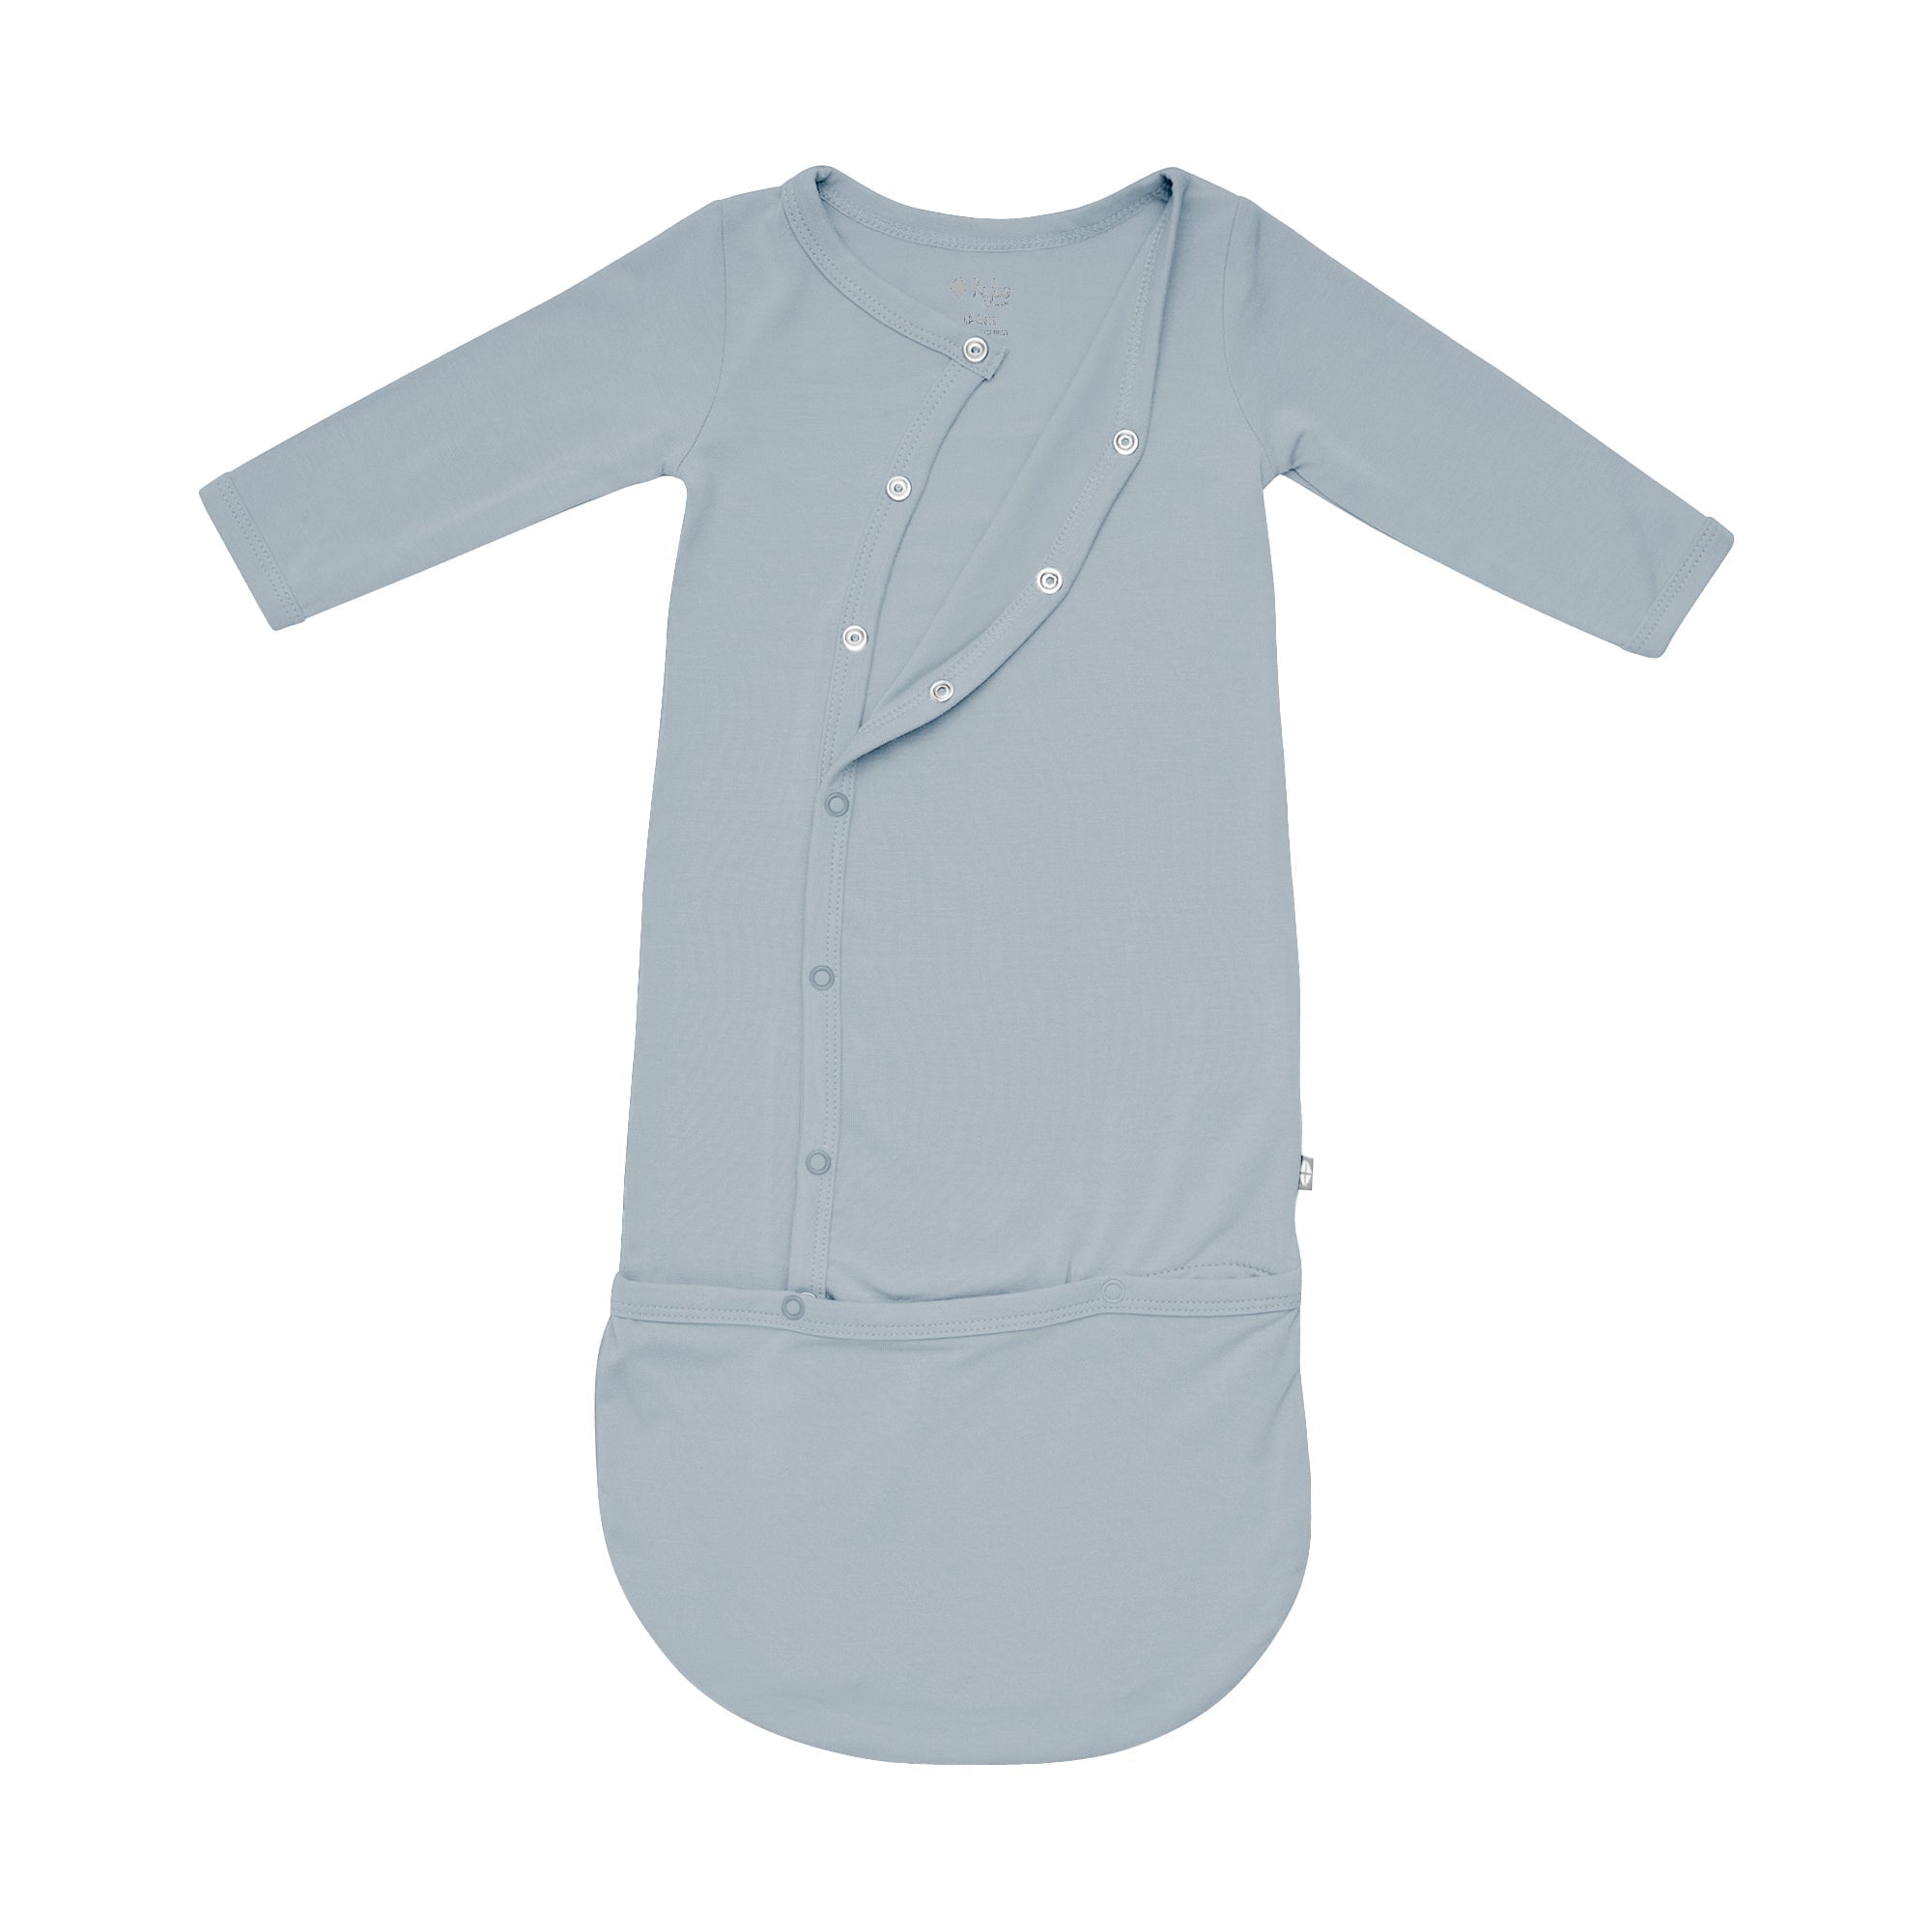  KYTE BABY Bundlers - Unisex Baby Sleeper Gowns Made of Soft  Bamboo Rayon Material, Preemie (Emerald, Preemie): Clothing, Shoes & Jewelry